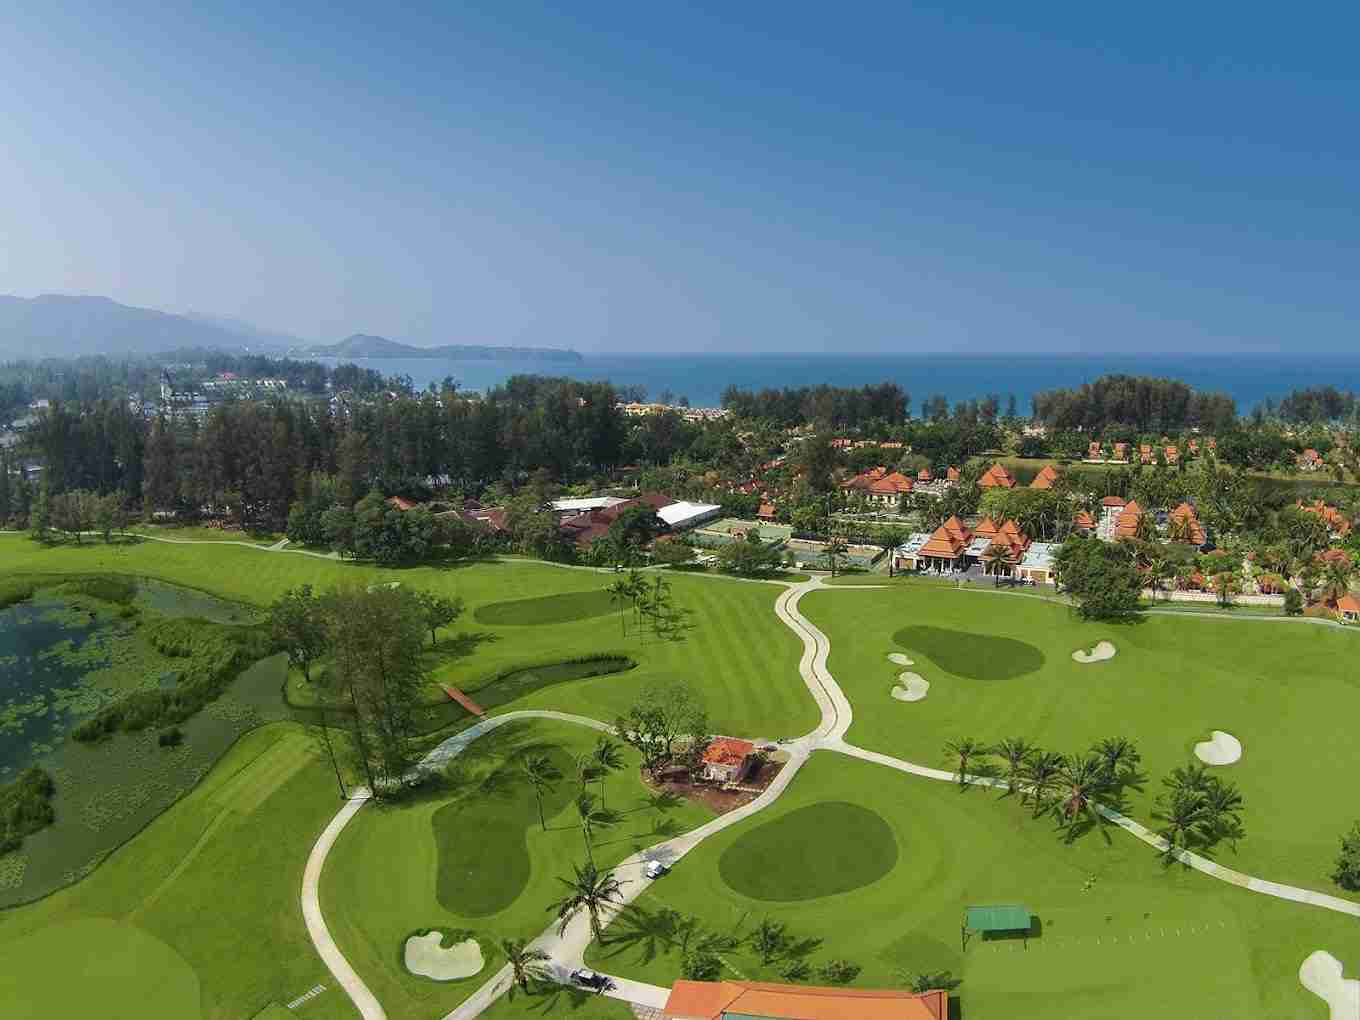 Golf Courses in Phuket